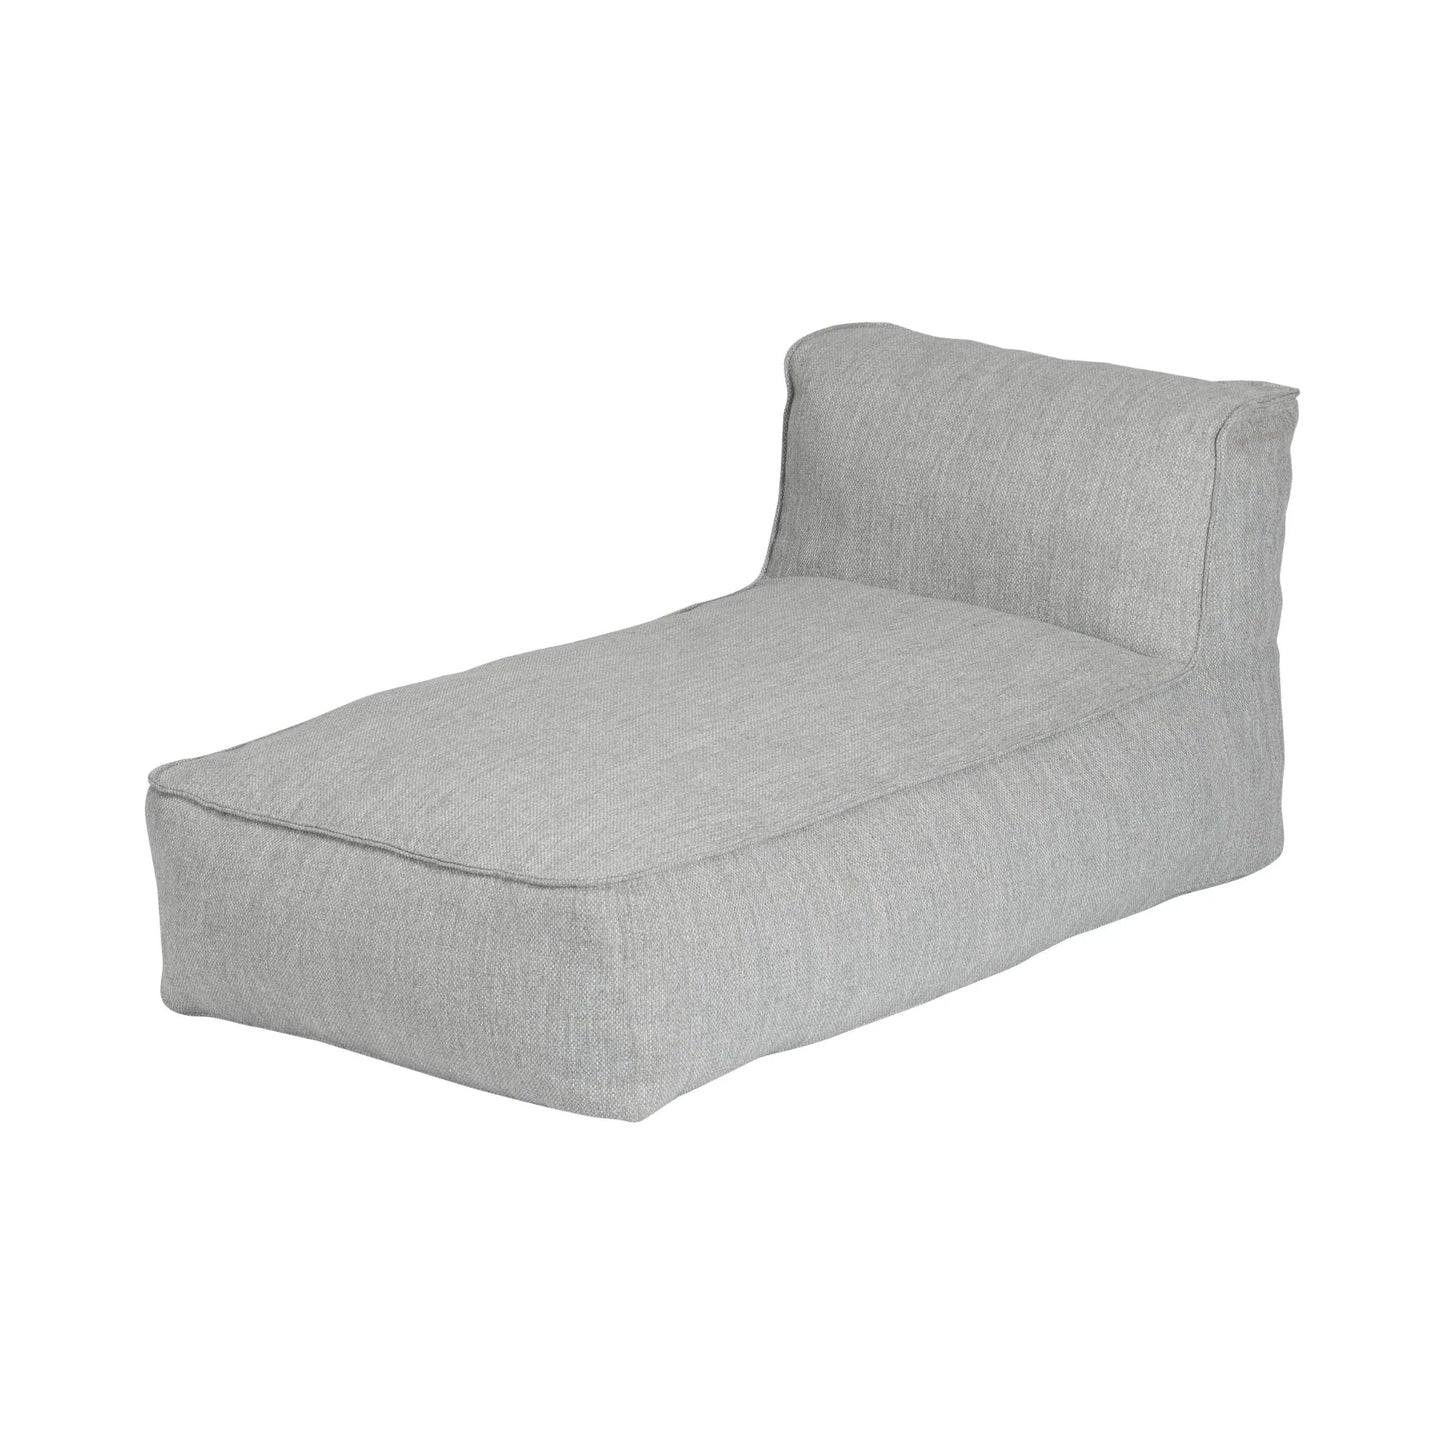 Blomus Grow Single Chaise Sectional Outdoor Patio Lounger Cloud 62063